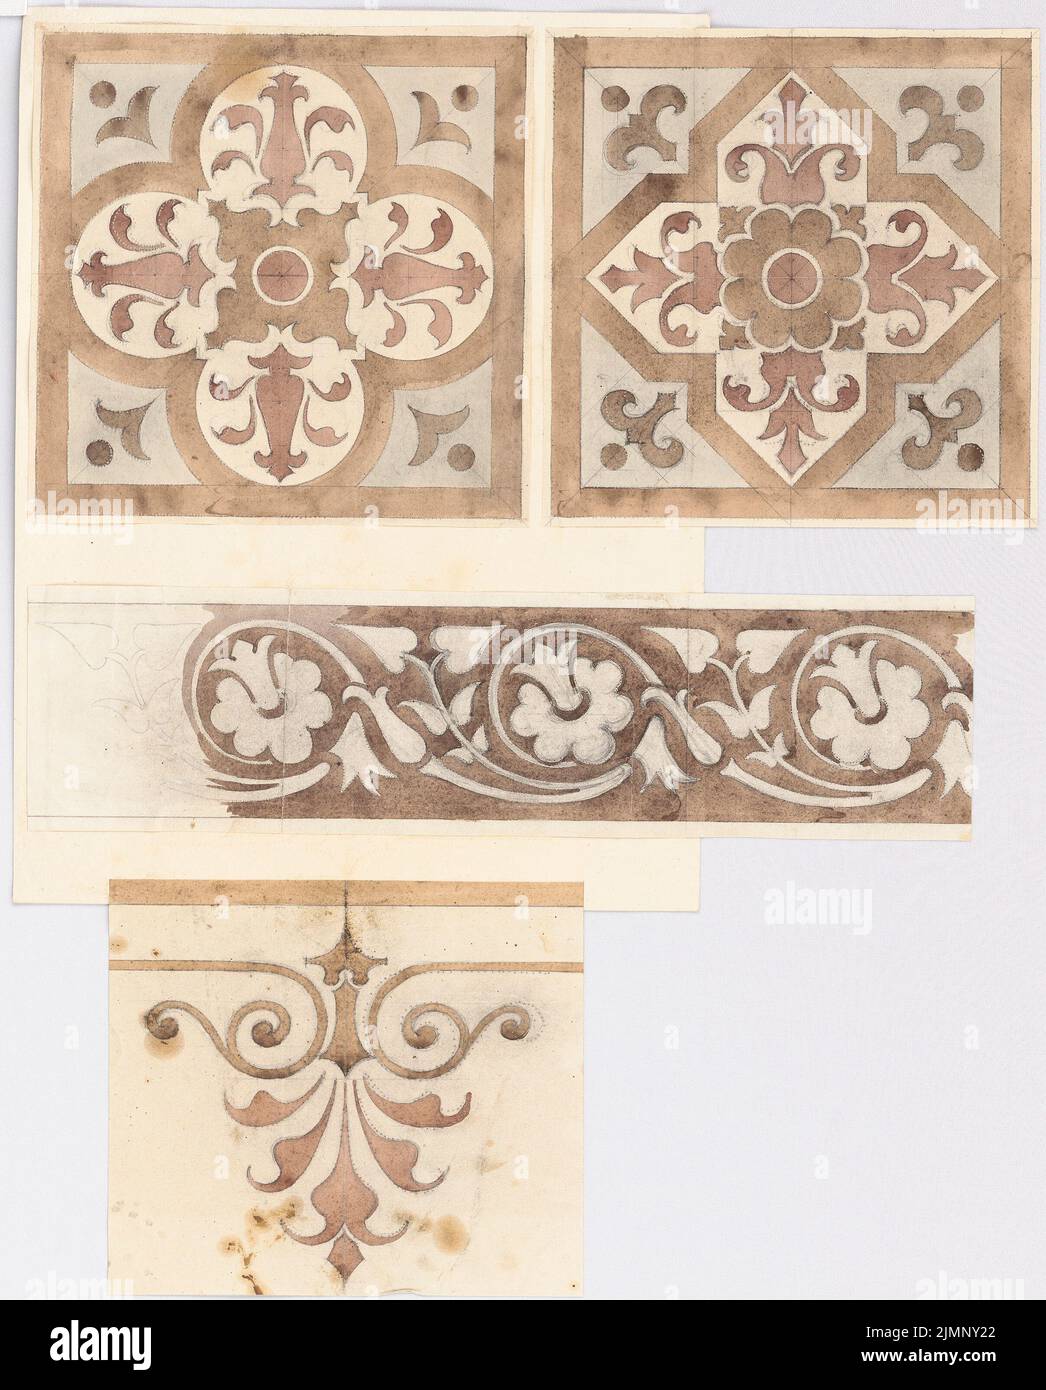 Lange Emil (1841-1926), ceiling or floor painting (without date): View. Pencil watercolored on paper, 56.3 x 45.3 cm (including scan edges) Lange Emil  (1841-1926): Decken- oder Fußbodenausmalung Stock Photo